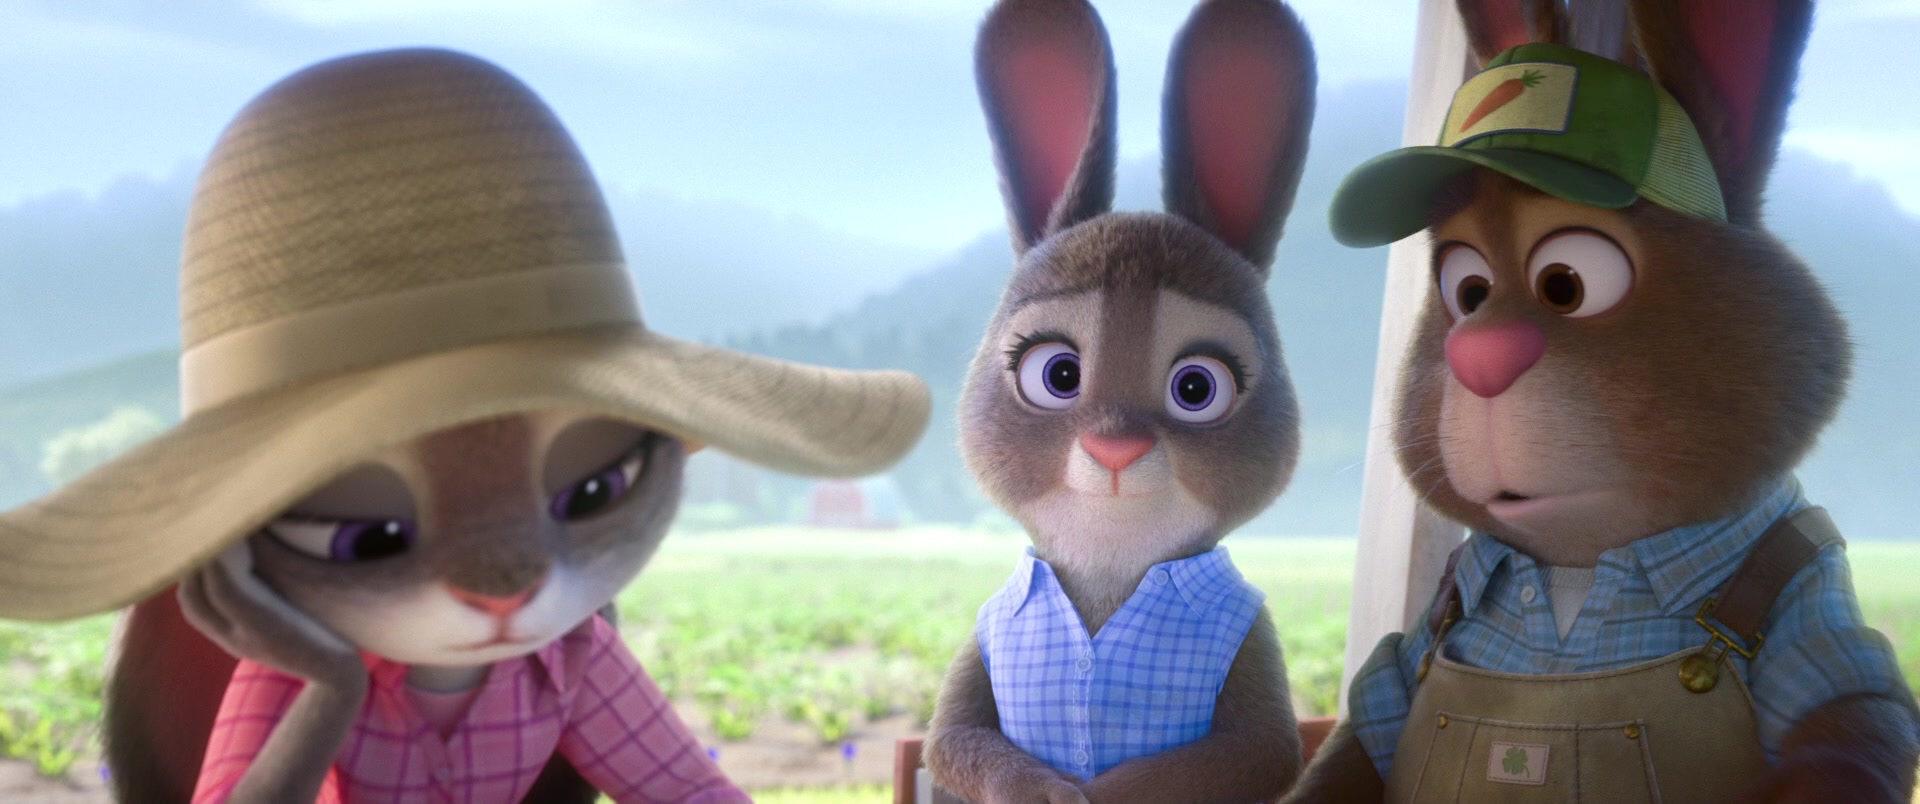 Judy and her parents